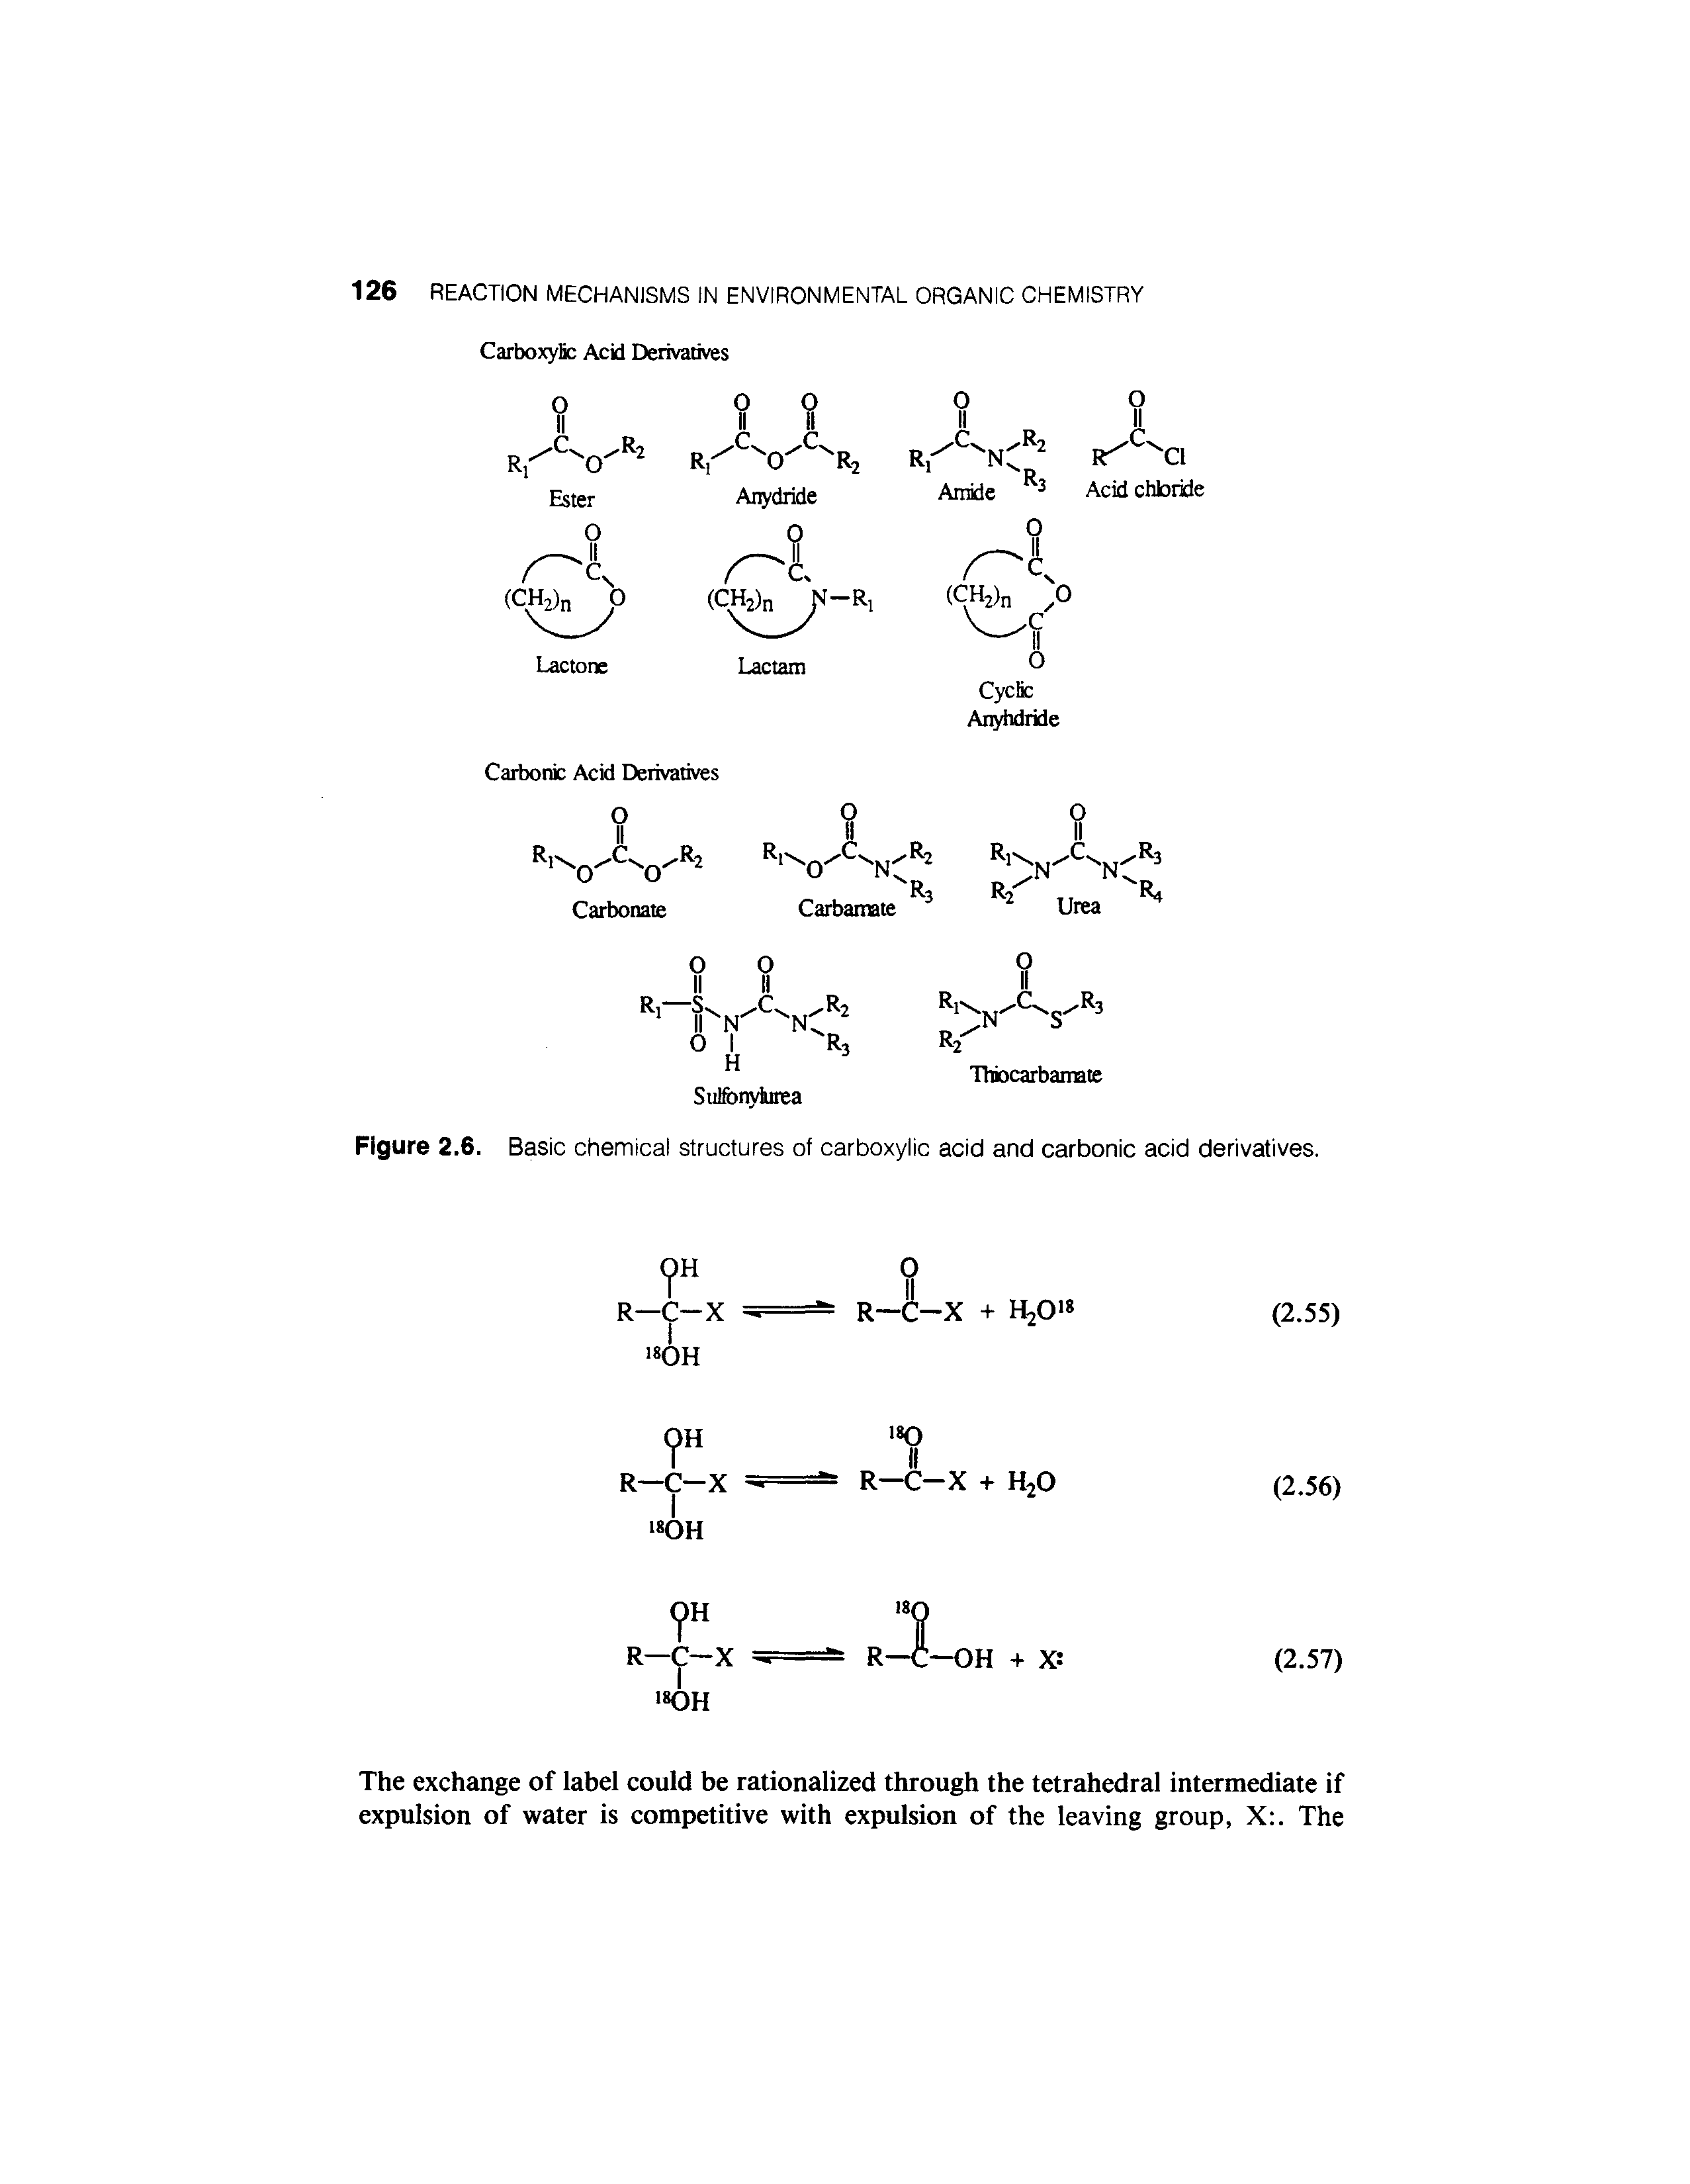 Figure 2.6. Basic chemical structures of carboxylic acid and carbonic acid derivatives.